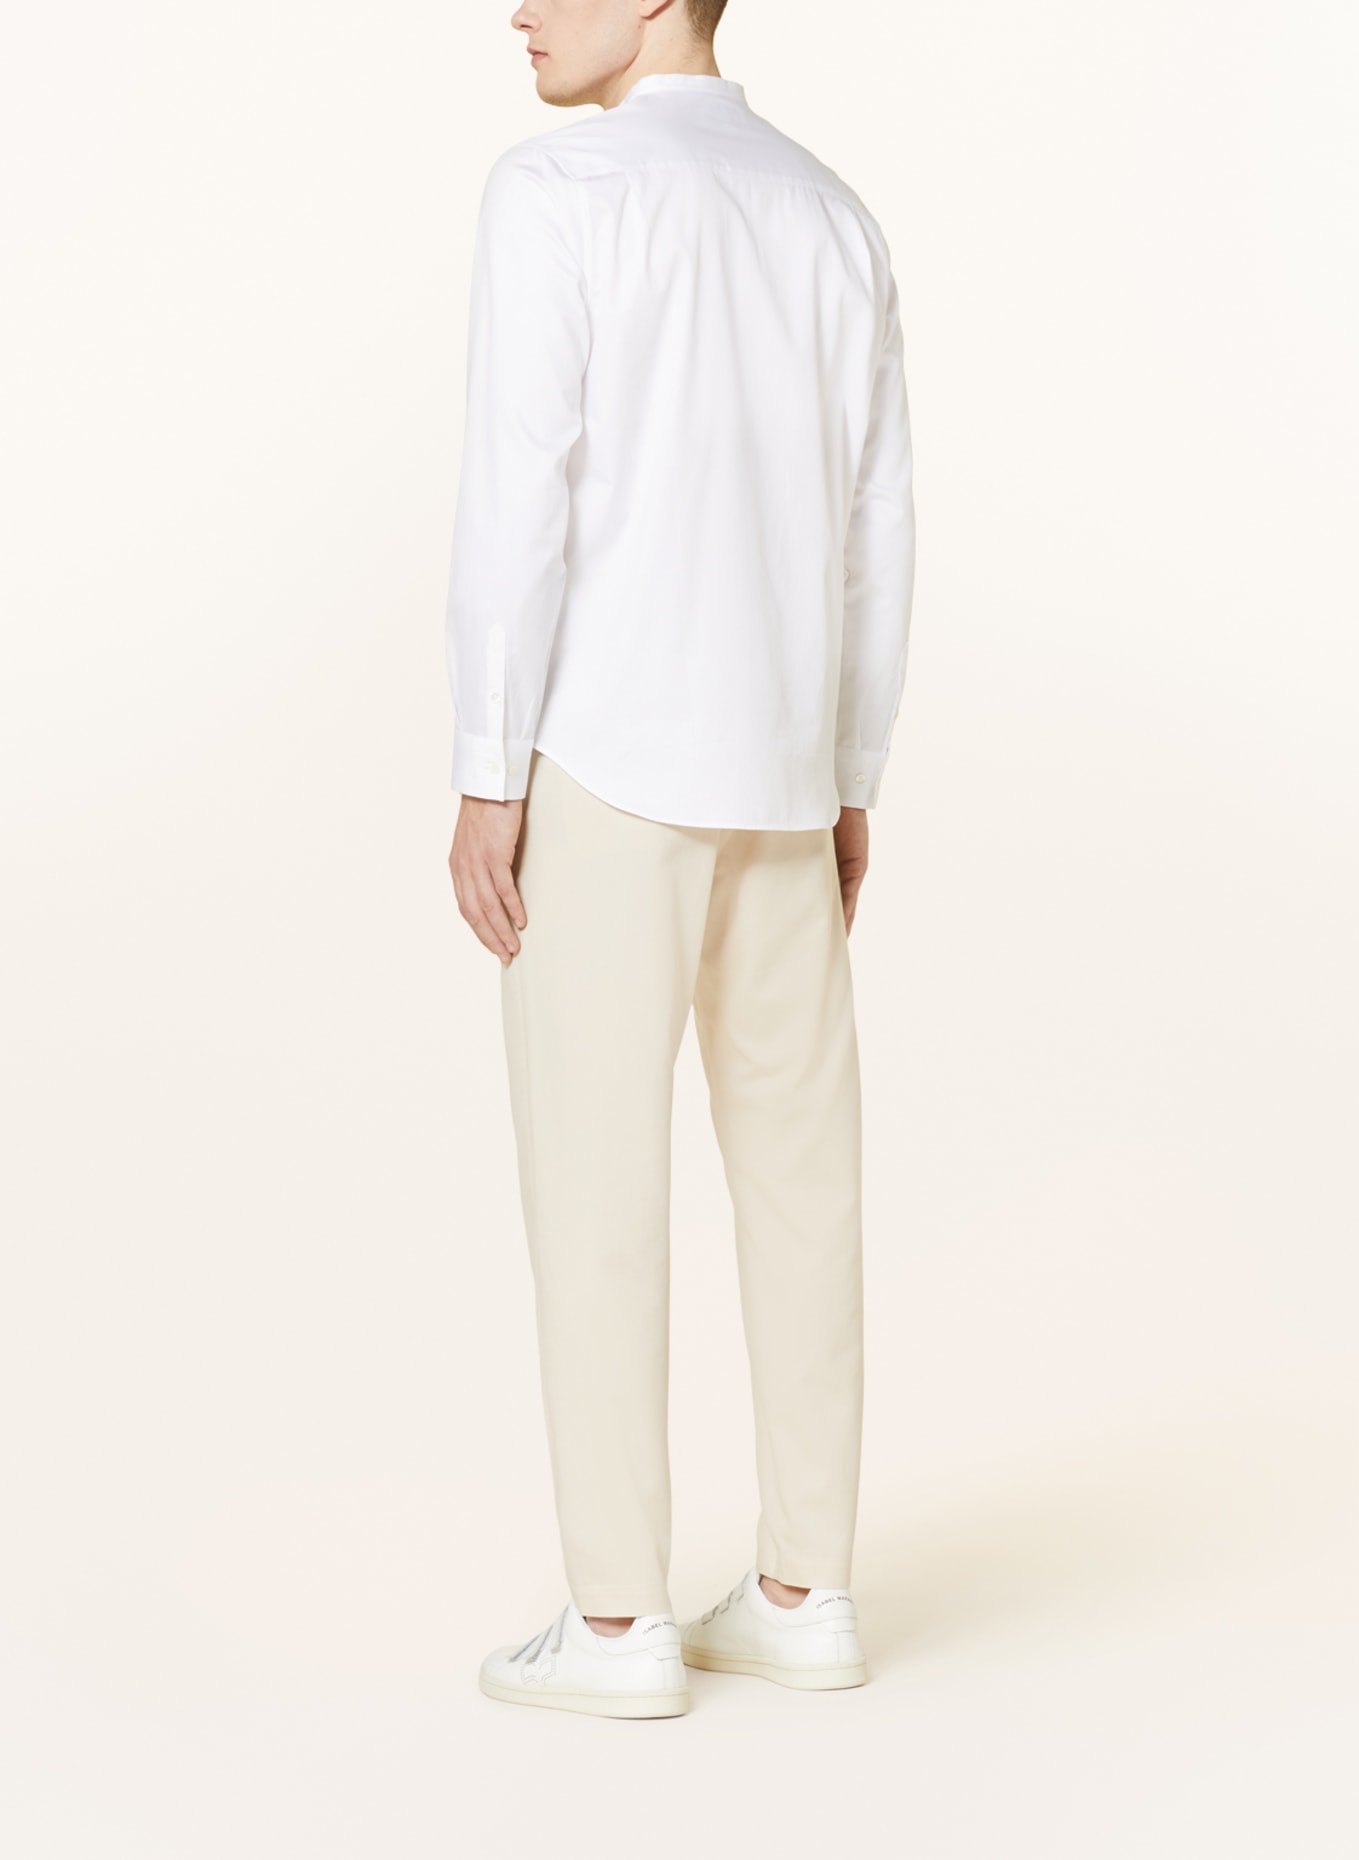 COS Shirt regular fit with stand-up collar, Color: WHITE (Image 3)